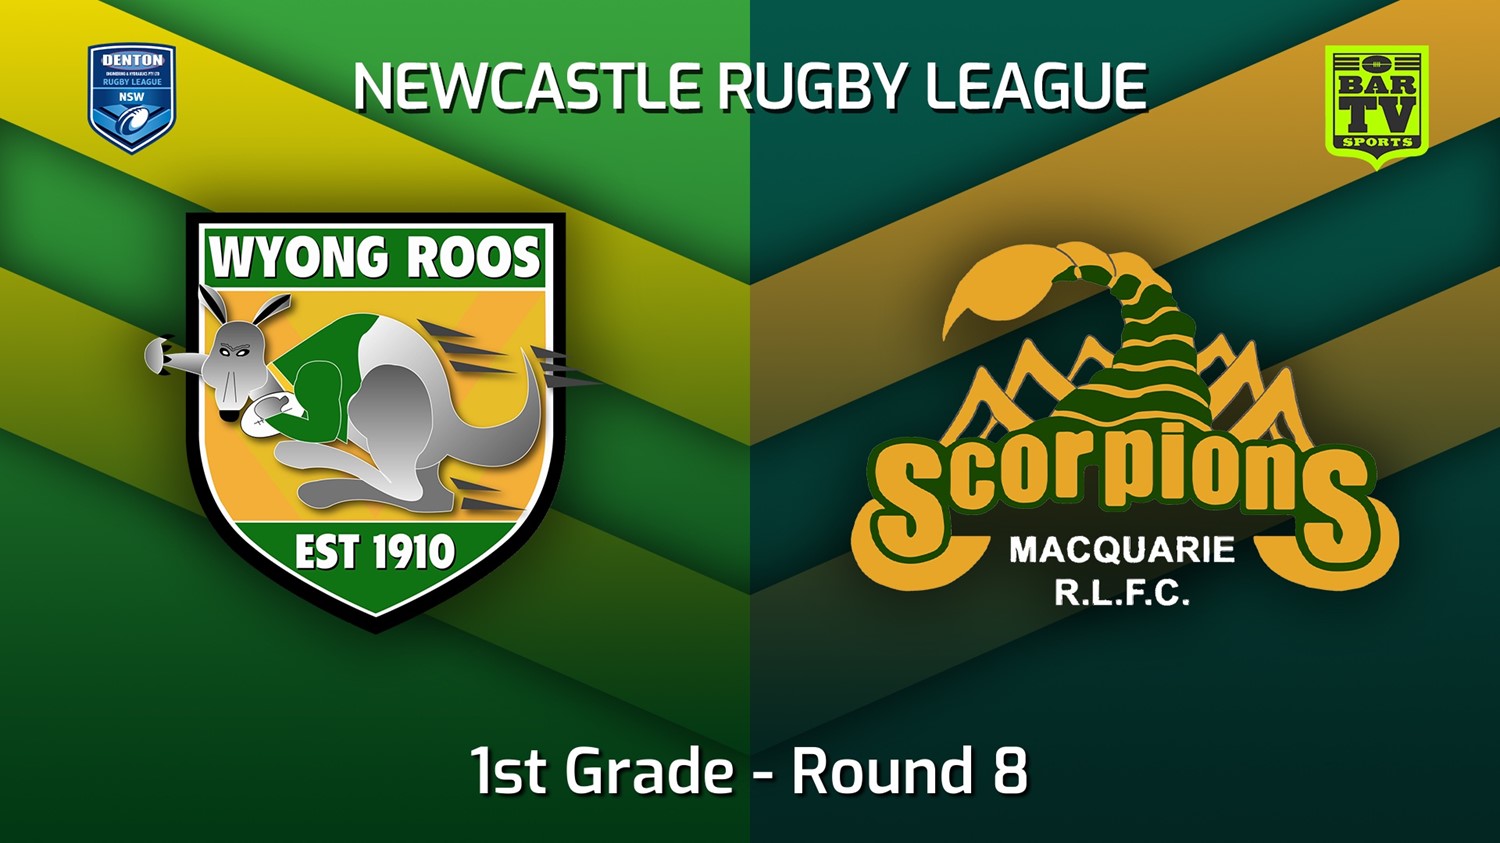 220521-Newcastle Round 8 - 1st Grade - Wyong Roos v Macquarie Scorpions Slate Image